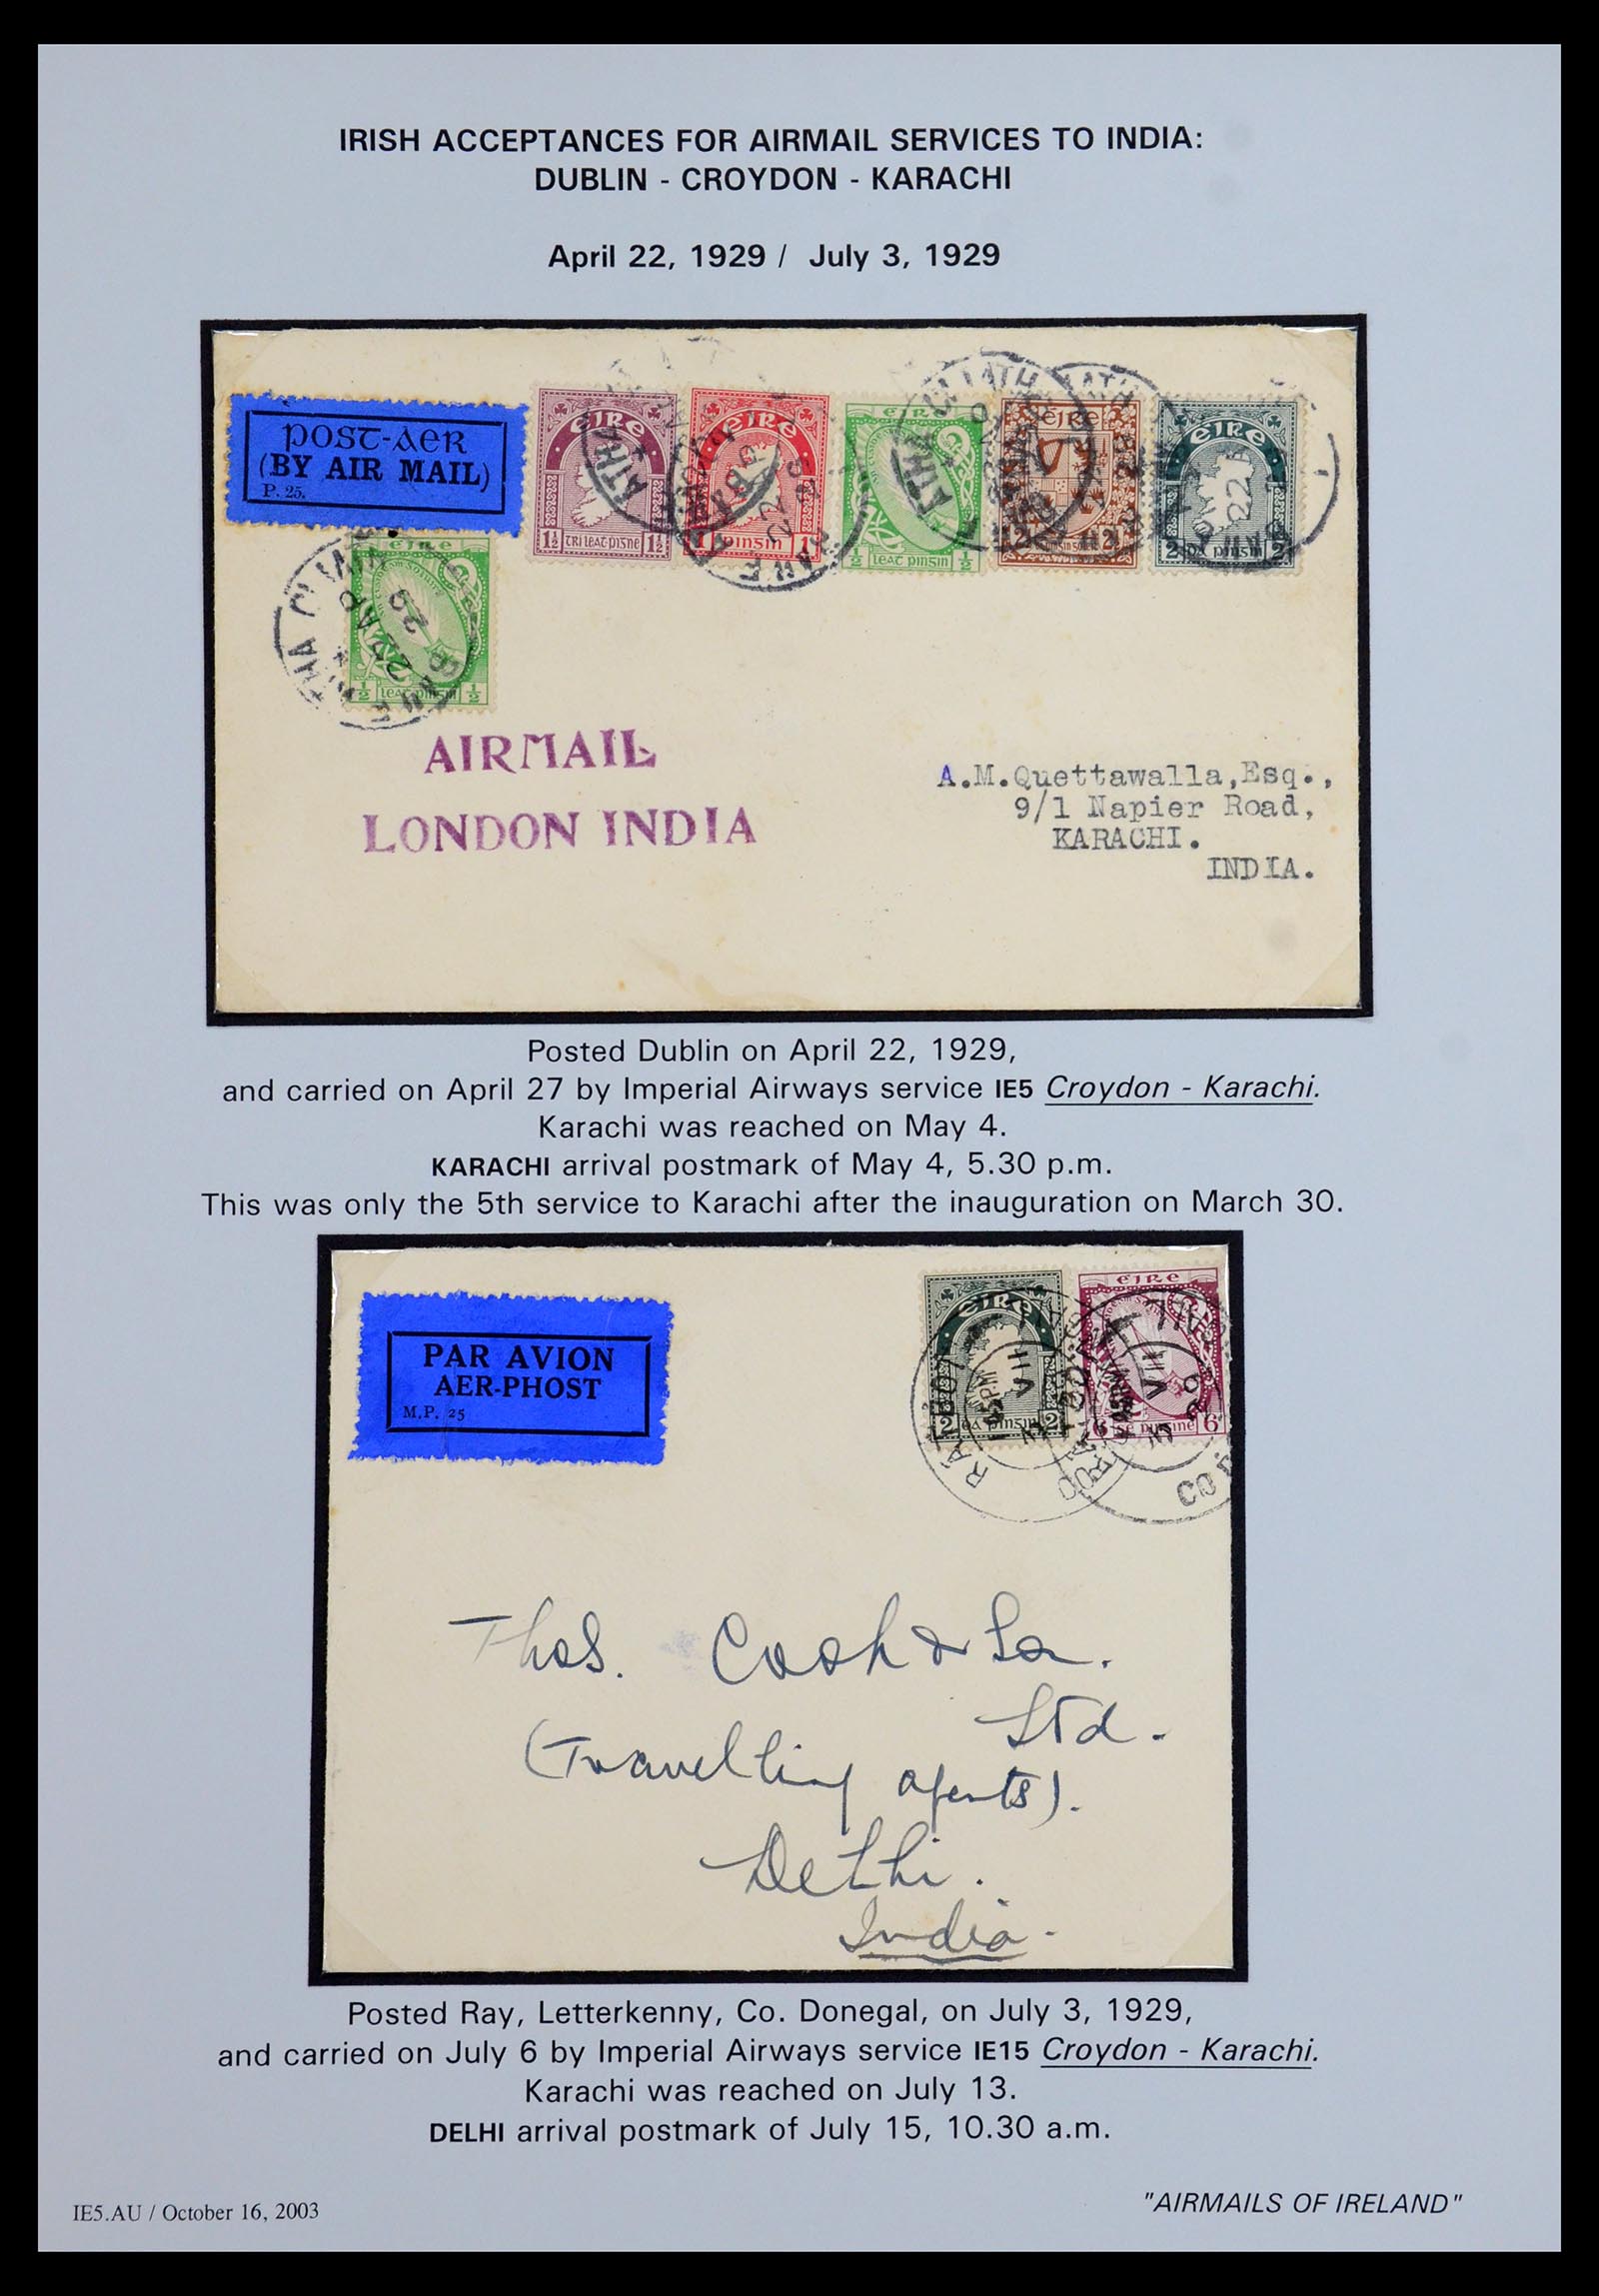 35994 002 - Stamp collection 35994 Ireland airmail covers 1929-1932.